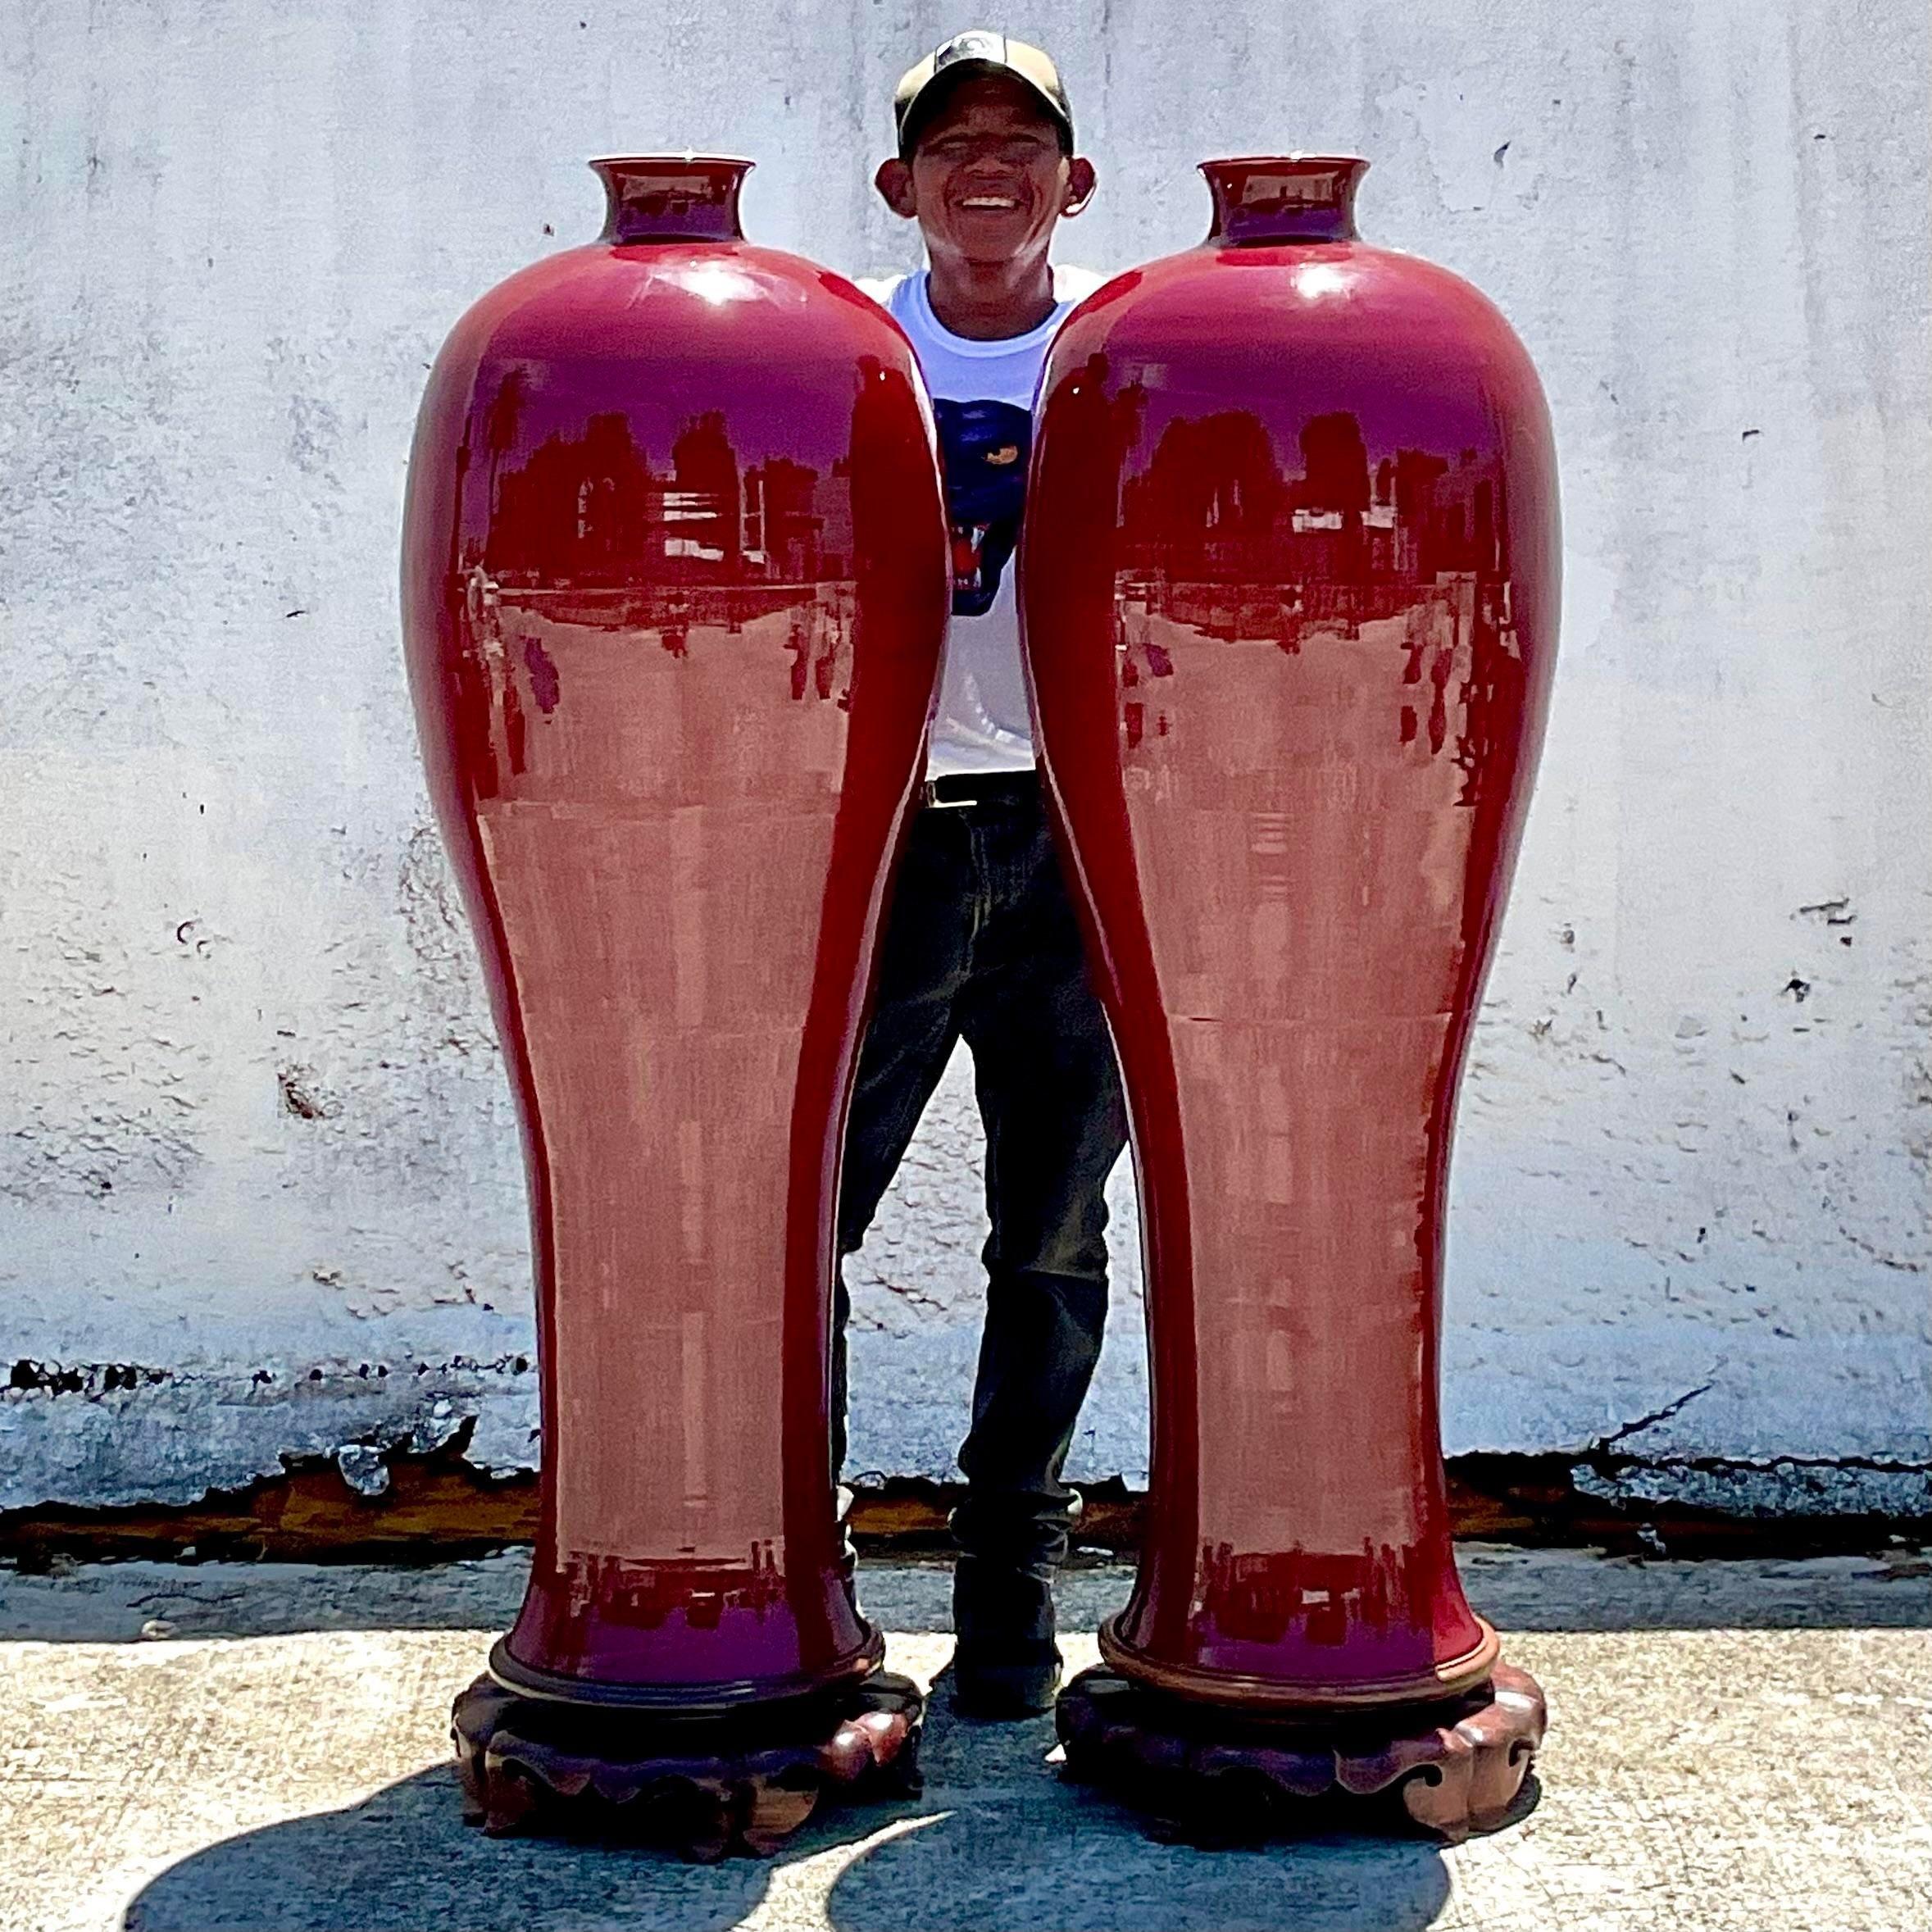 Vintage Boho Monumental “Sang De Bouf” Glazed Ceramic Vases - a Pair In Good Condition For Sale In west palm beach, FL